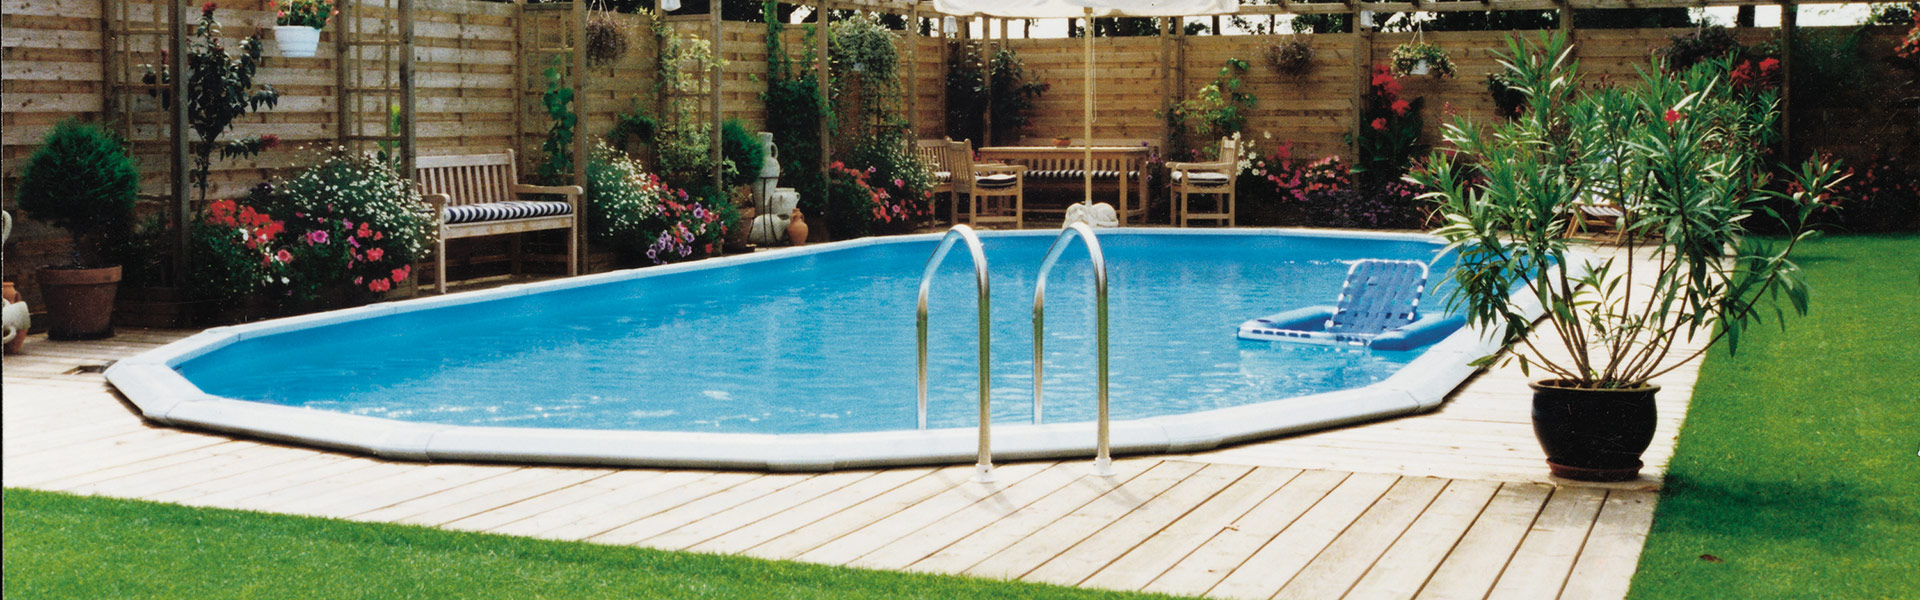 What Maintenance Should I Do On My Pool During Fall & Winter